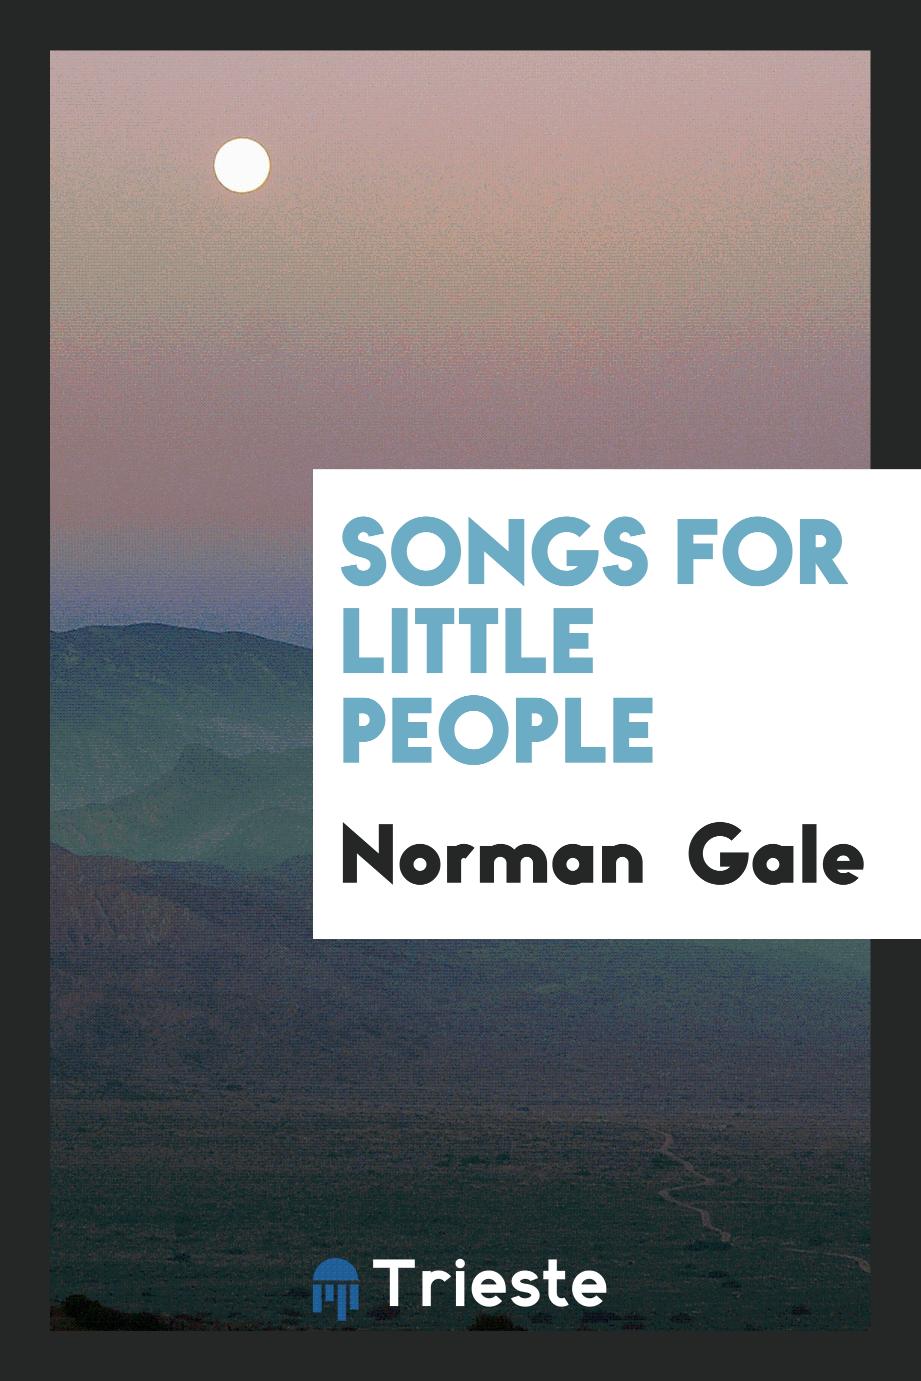 Songs for little people